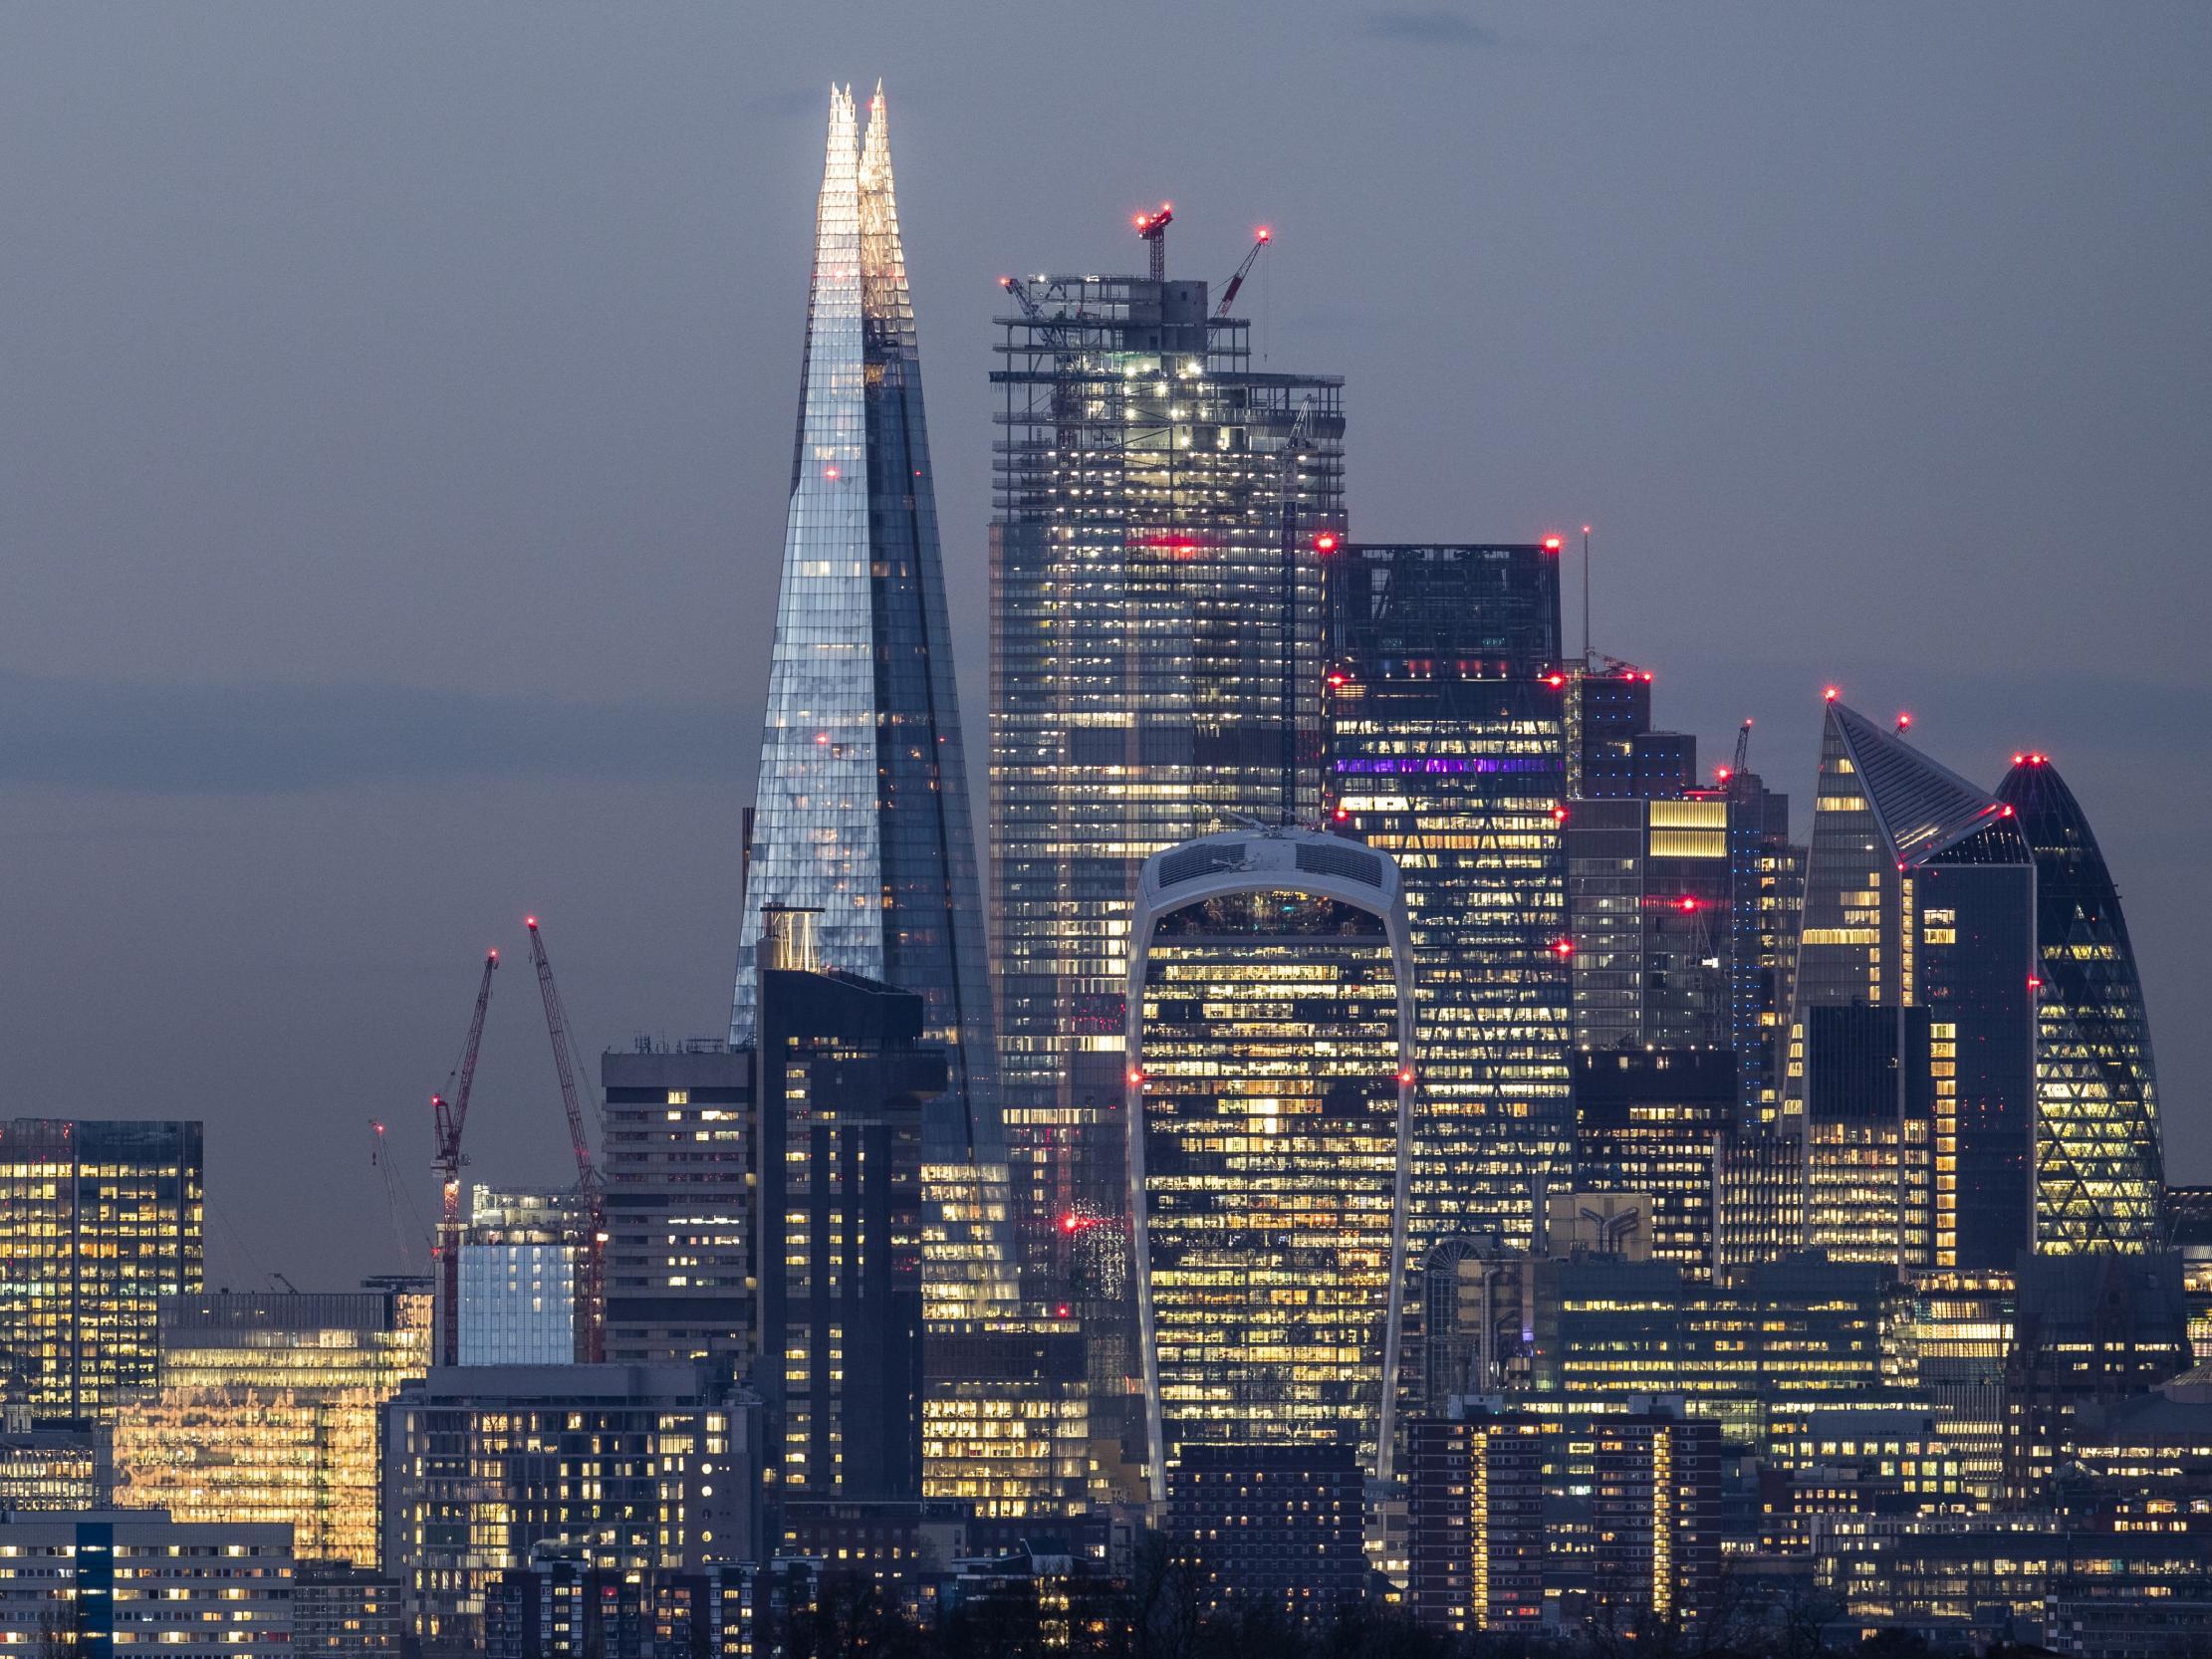 The City of London's financial companies may have to become 'rule-takers' to operate in the EU